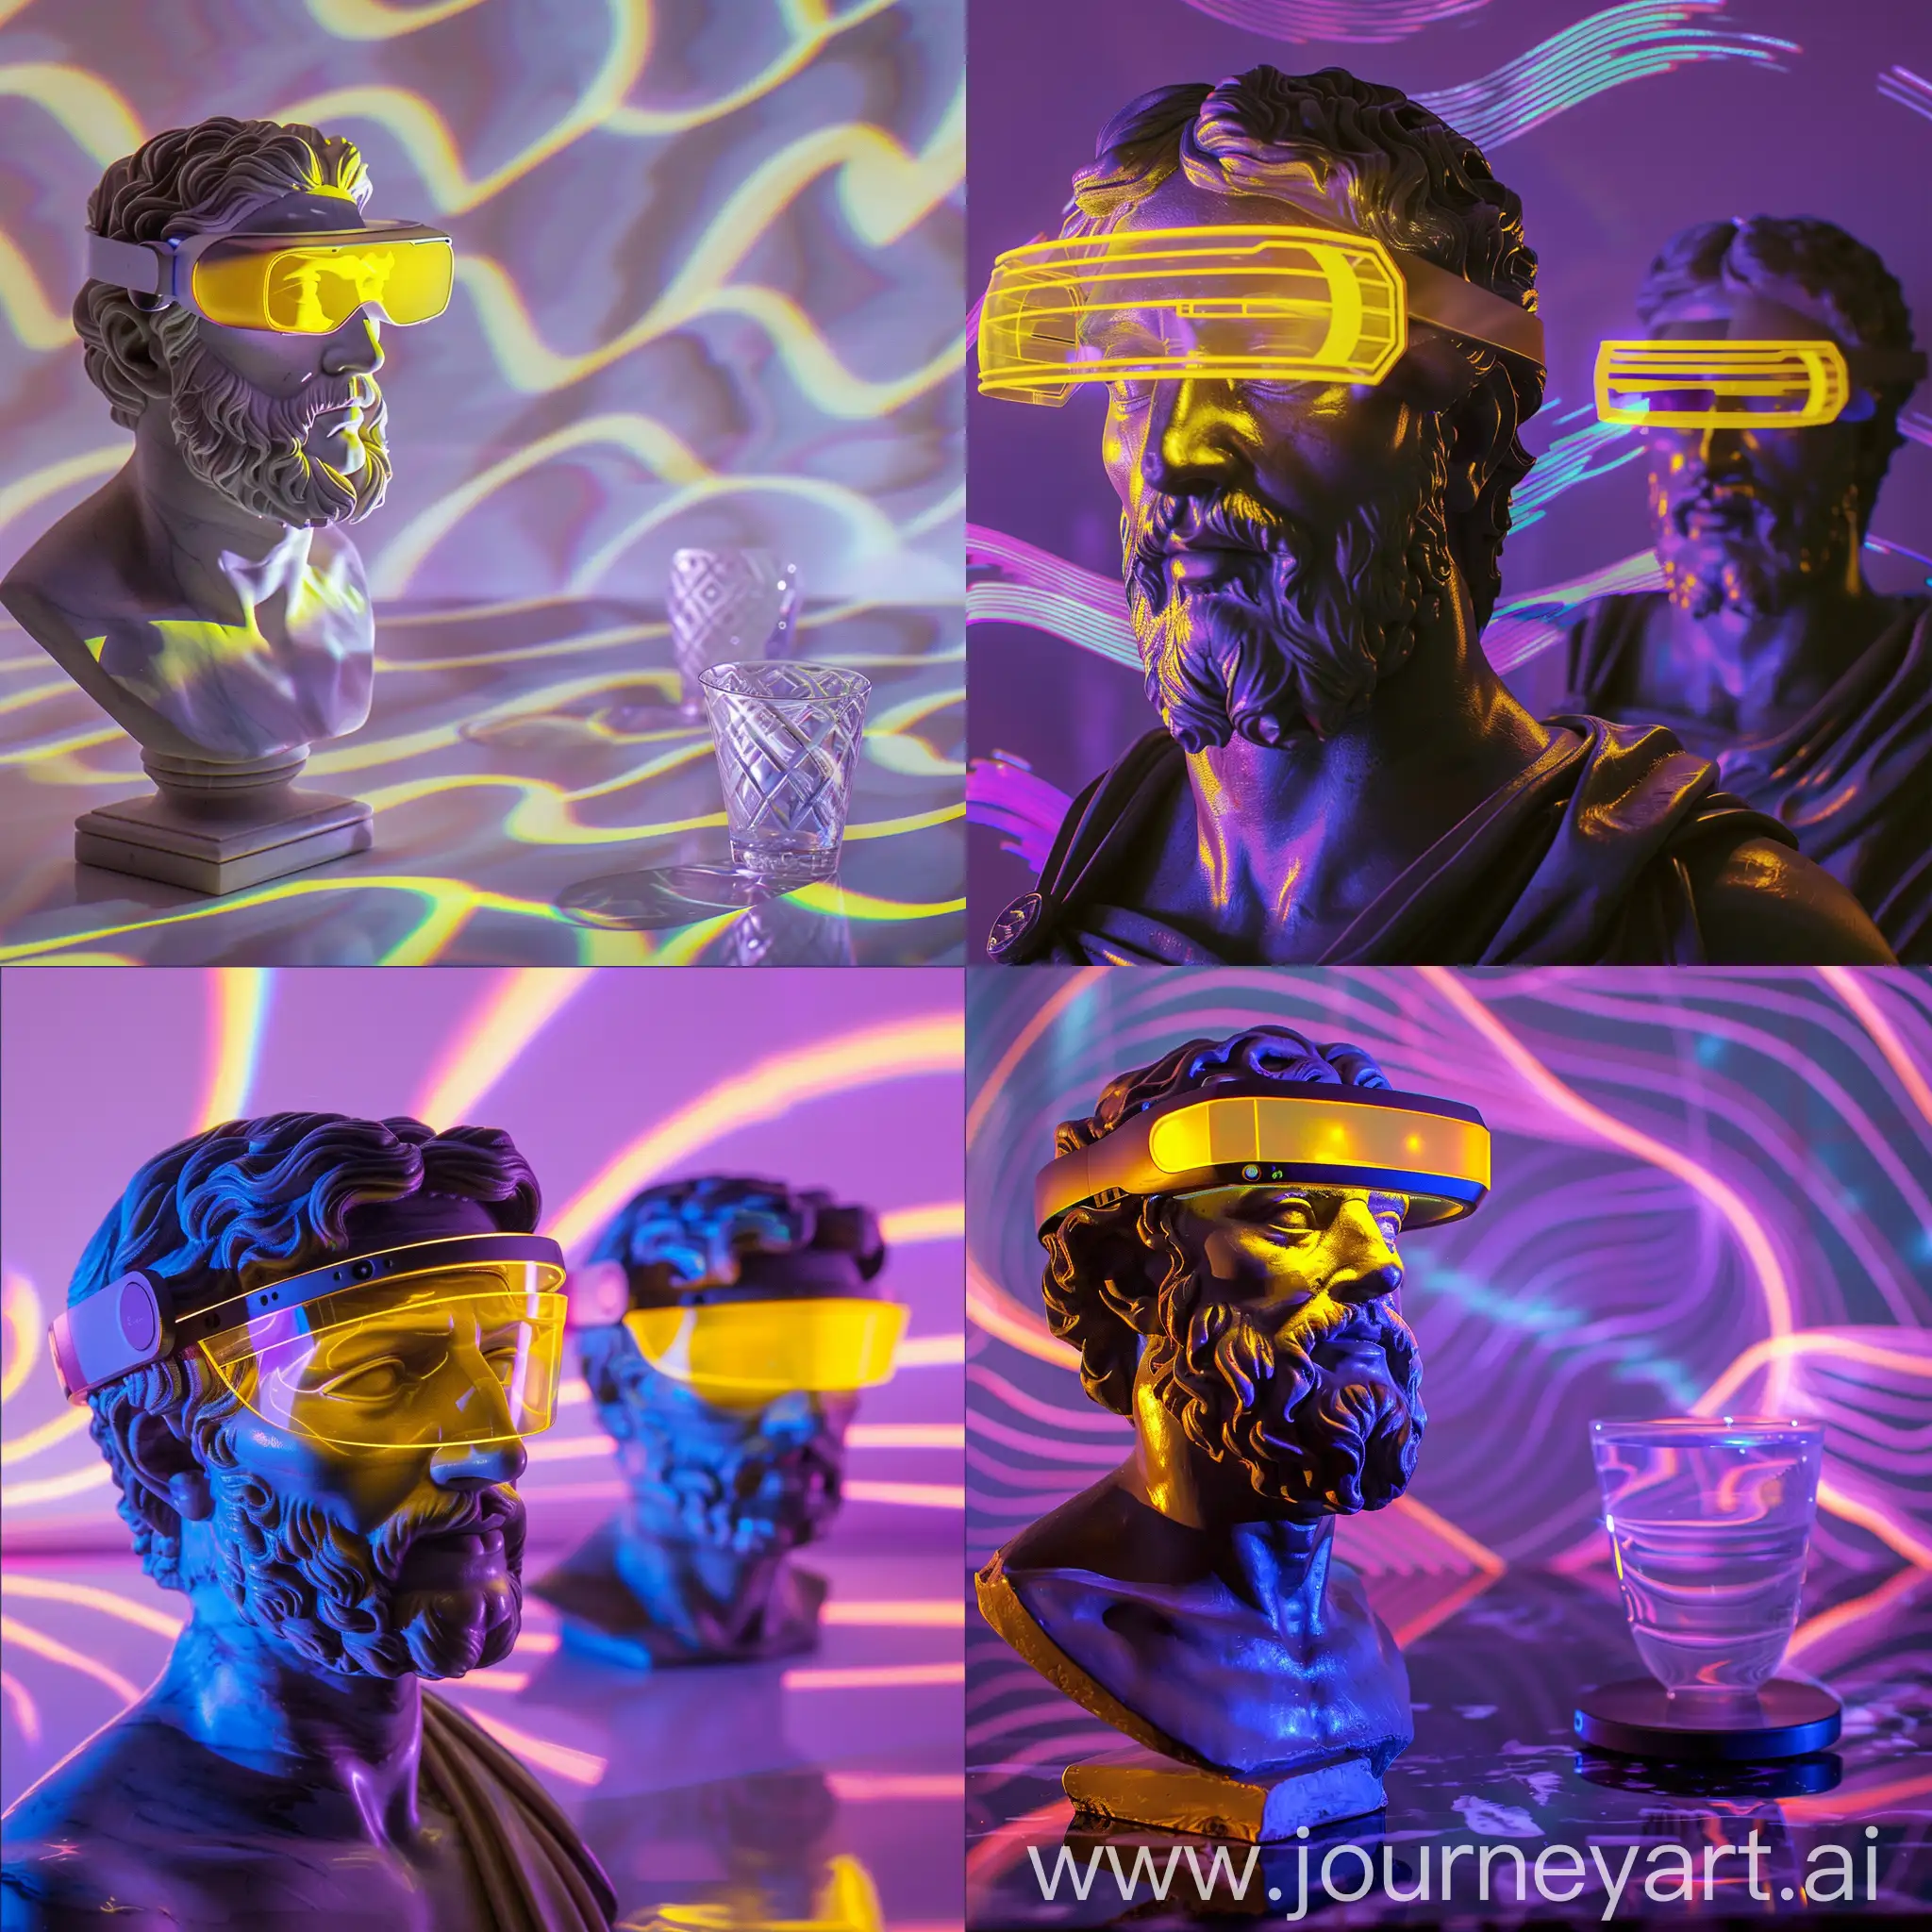 A Sculpture of Greek Philosopher in the Left of Photo, Bust Style, Headshot Pose, VR Glasses on Sculpture Eyes, Yellow Light on Top of Glasses, Purple Light Reflections, Dar Theme, Wave Pattern in Background, Medium Shot, High Quality 